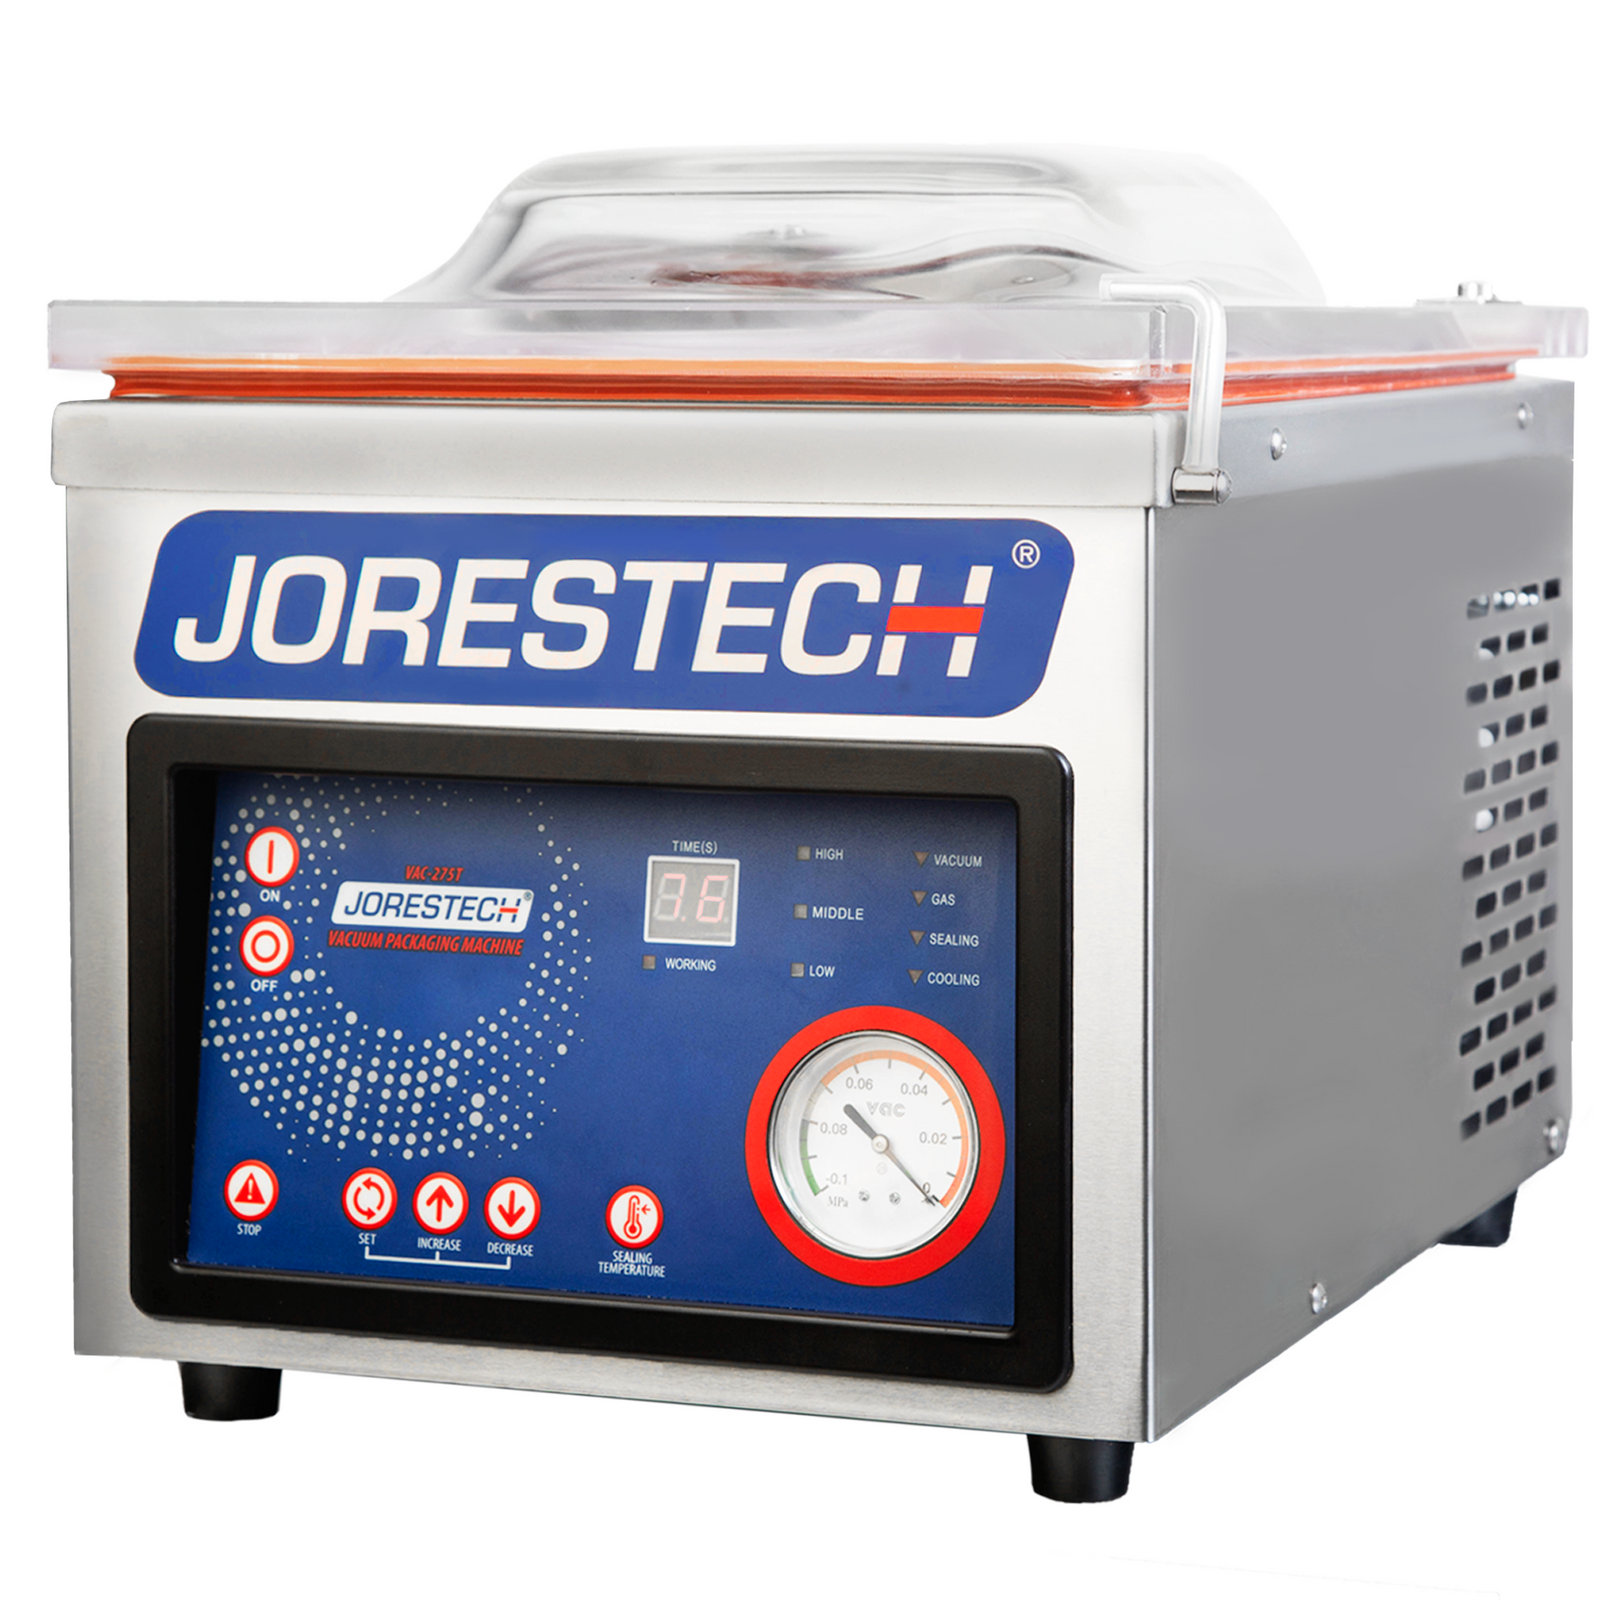 Stainless steel JORES TECHNOLOGIES® tabletop commercial chamber vacuum sealer with one sealing bar. Bracket is holding the lid in a closed position and a blue and red control panel with a modern design